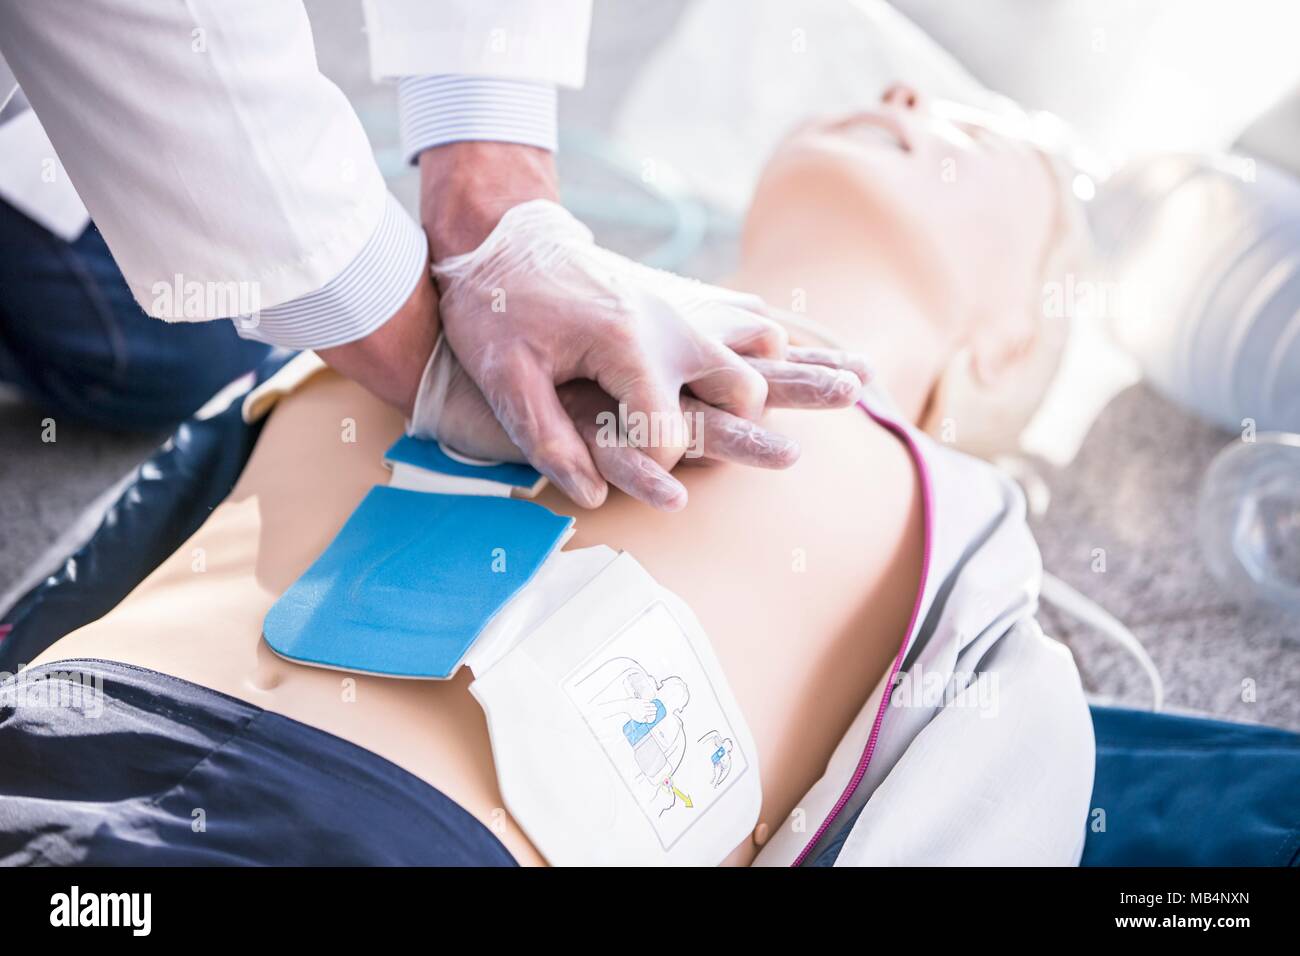 Doctor undertaking CPR training on dummies. Automated external defibrillator pads have been placed on the dummy's chest. Stock Photo